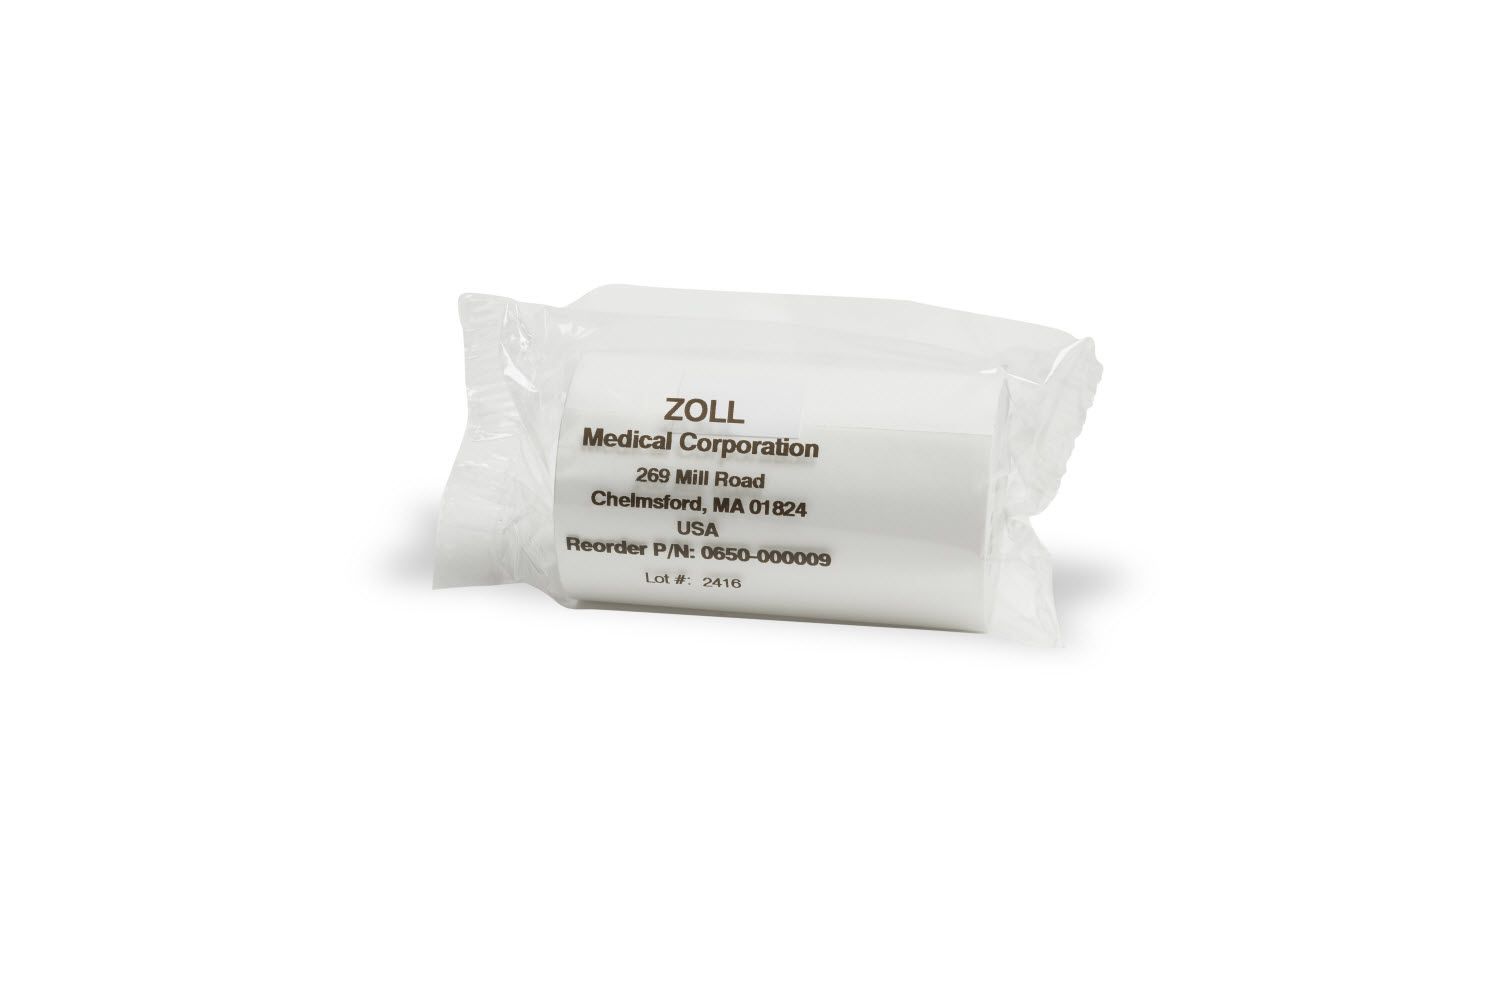 Zoll Thermal Paper 80mm Roll Box of 6 8000-000875-01